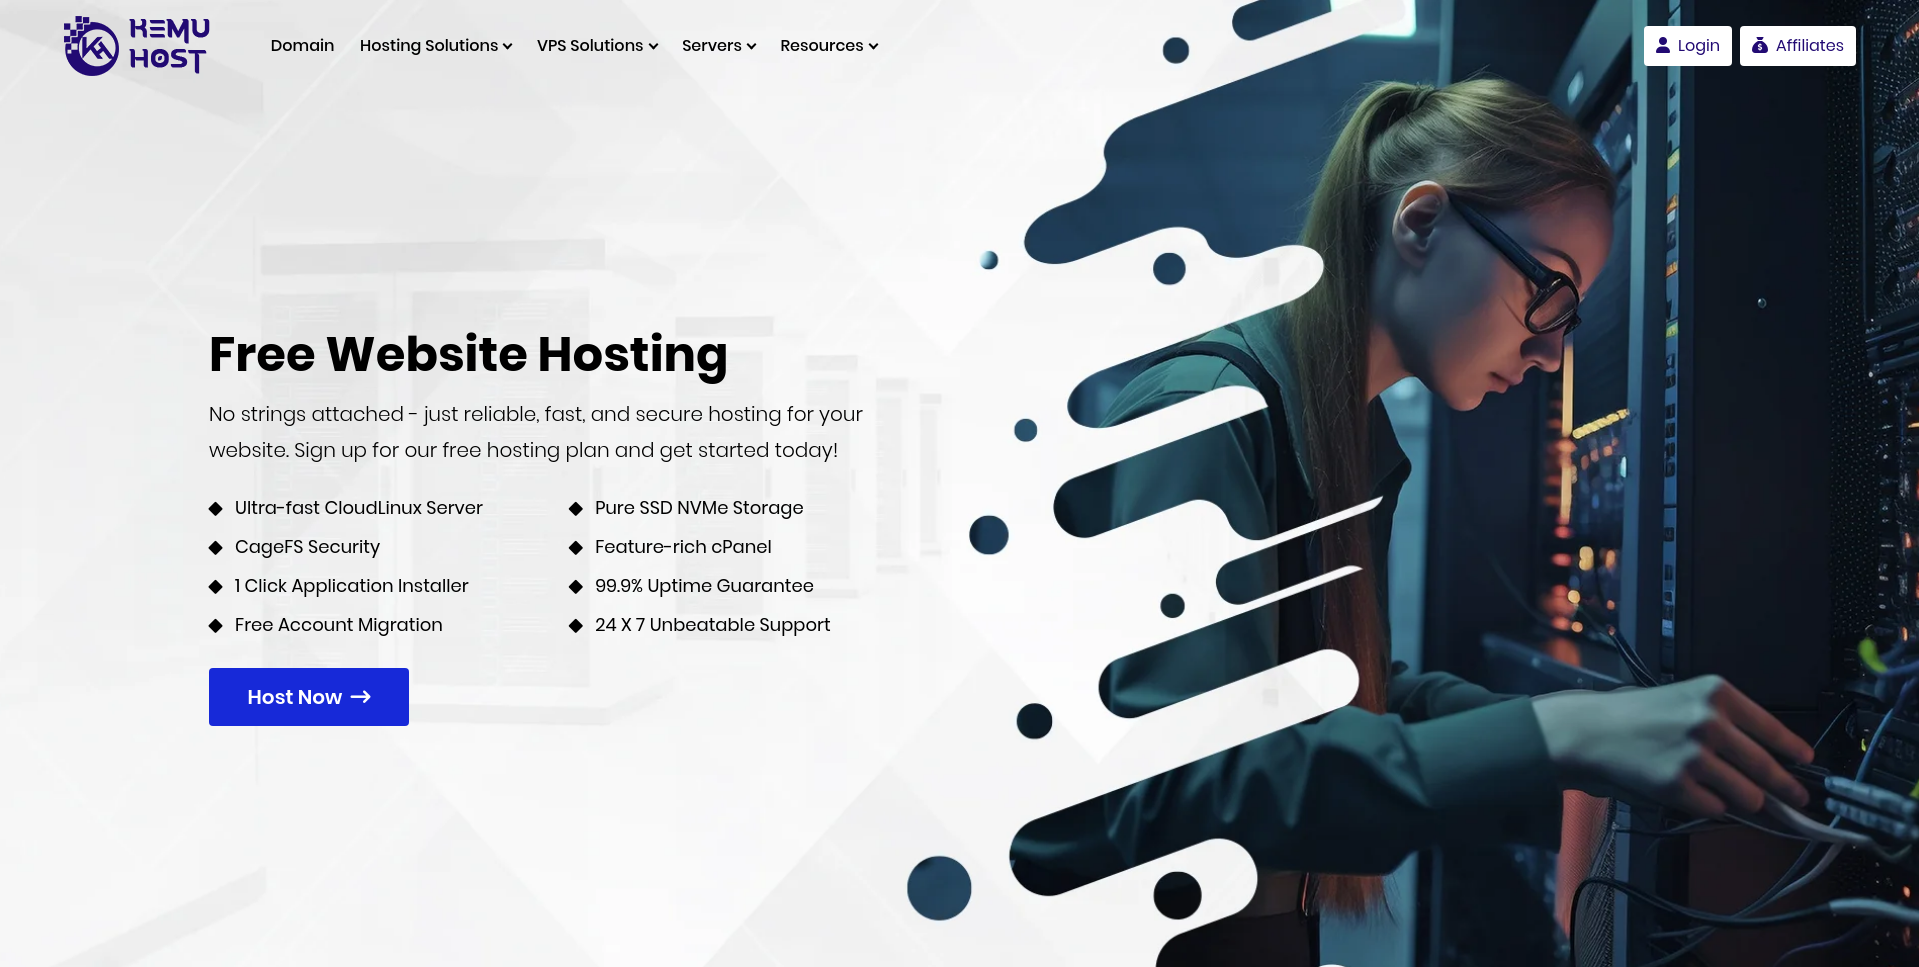 KemuHost Free Website Hosting with cPanel - No Ads / No Banners